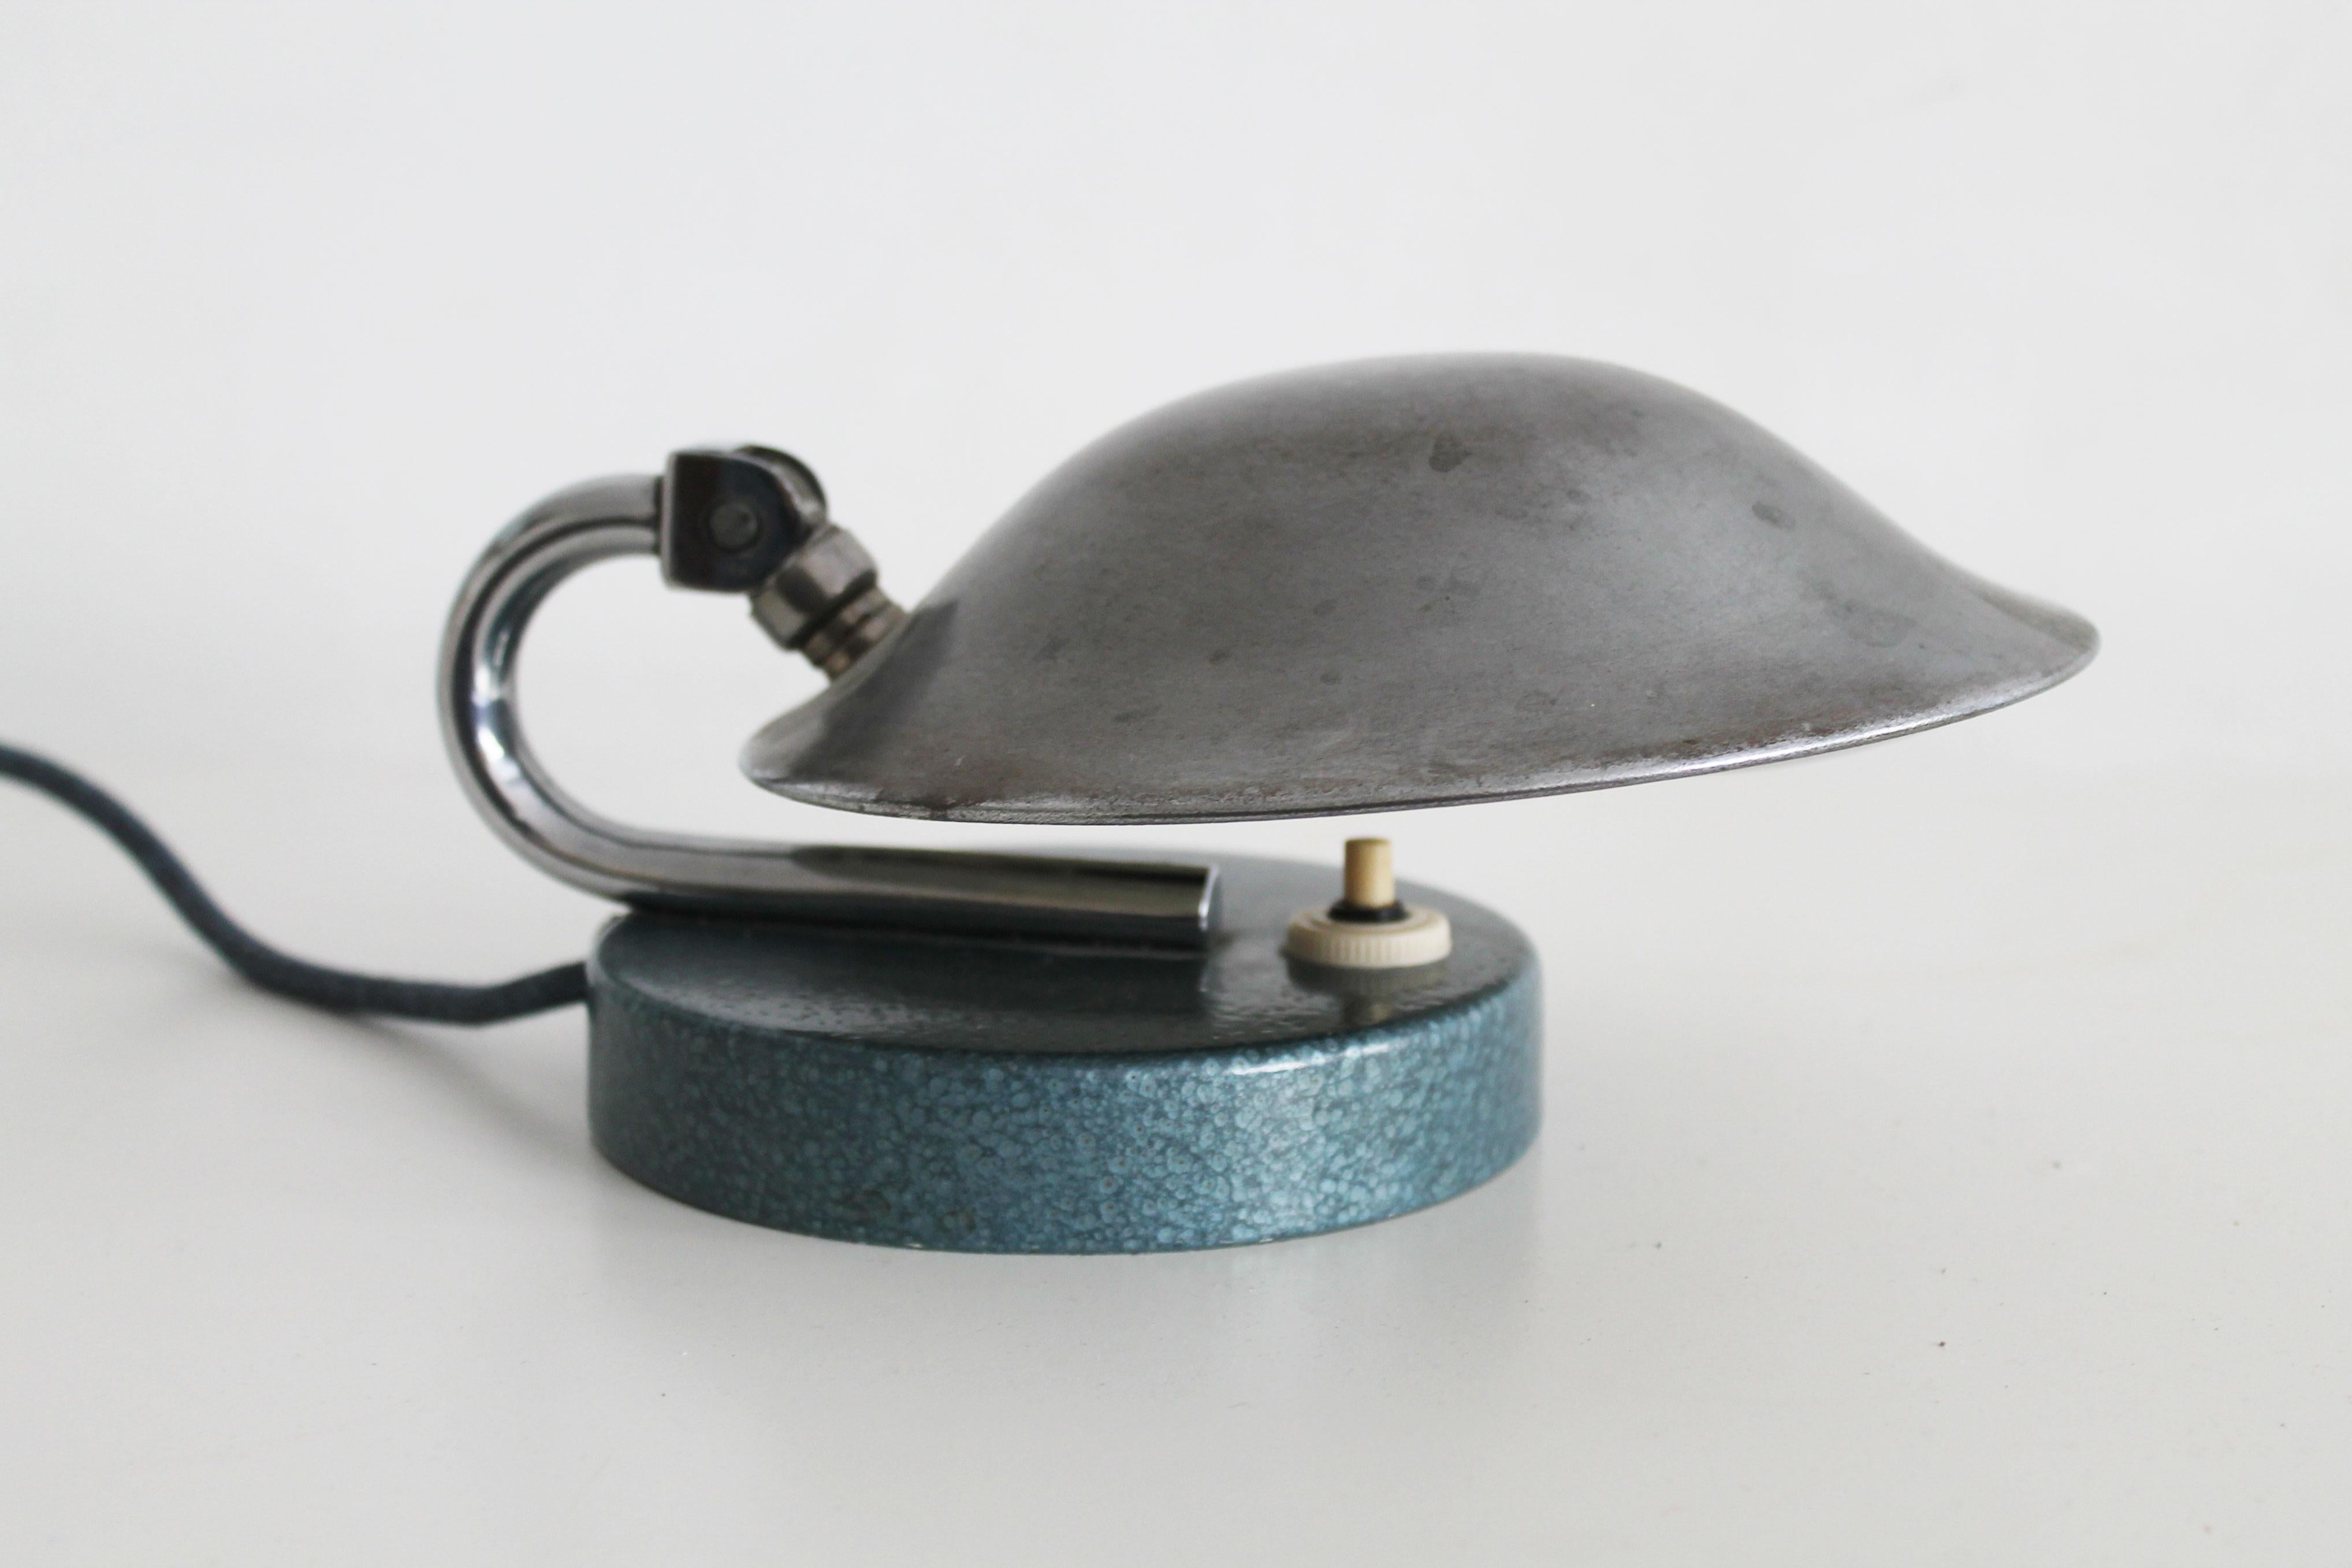 This is an original Modernist Table lamp produced in the 1930’s by a Czech Company Napako. It was designed by Carl Jucker, who later became famous for his design of the now iconic table lamp (in collaboration with Wilhem Wagenfeld). This